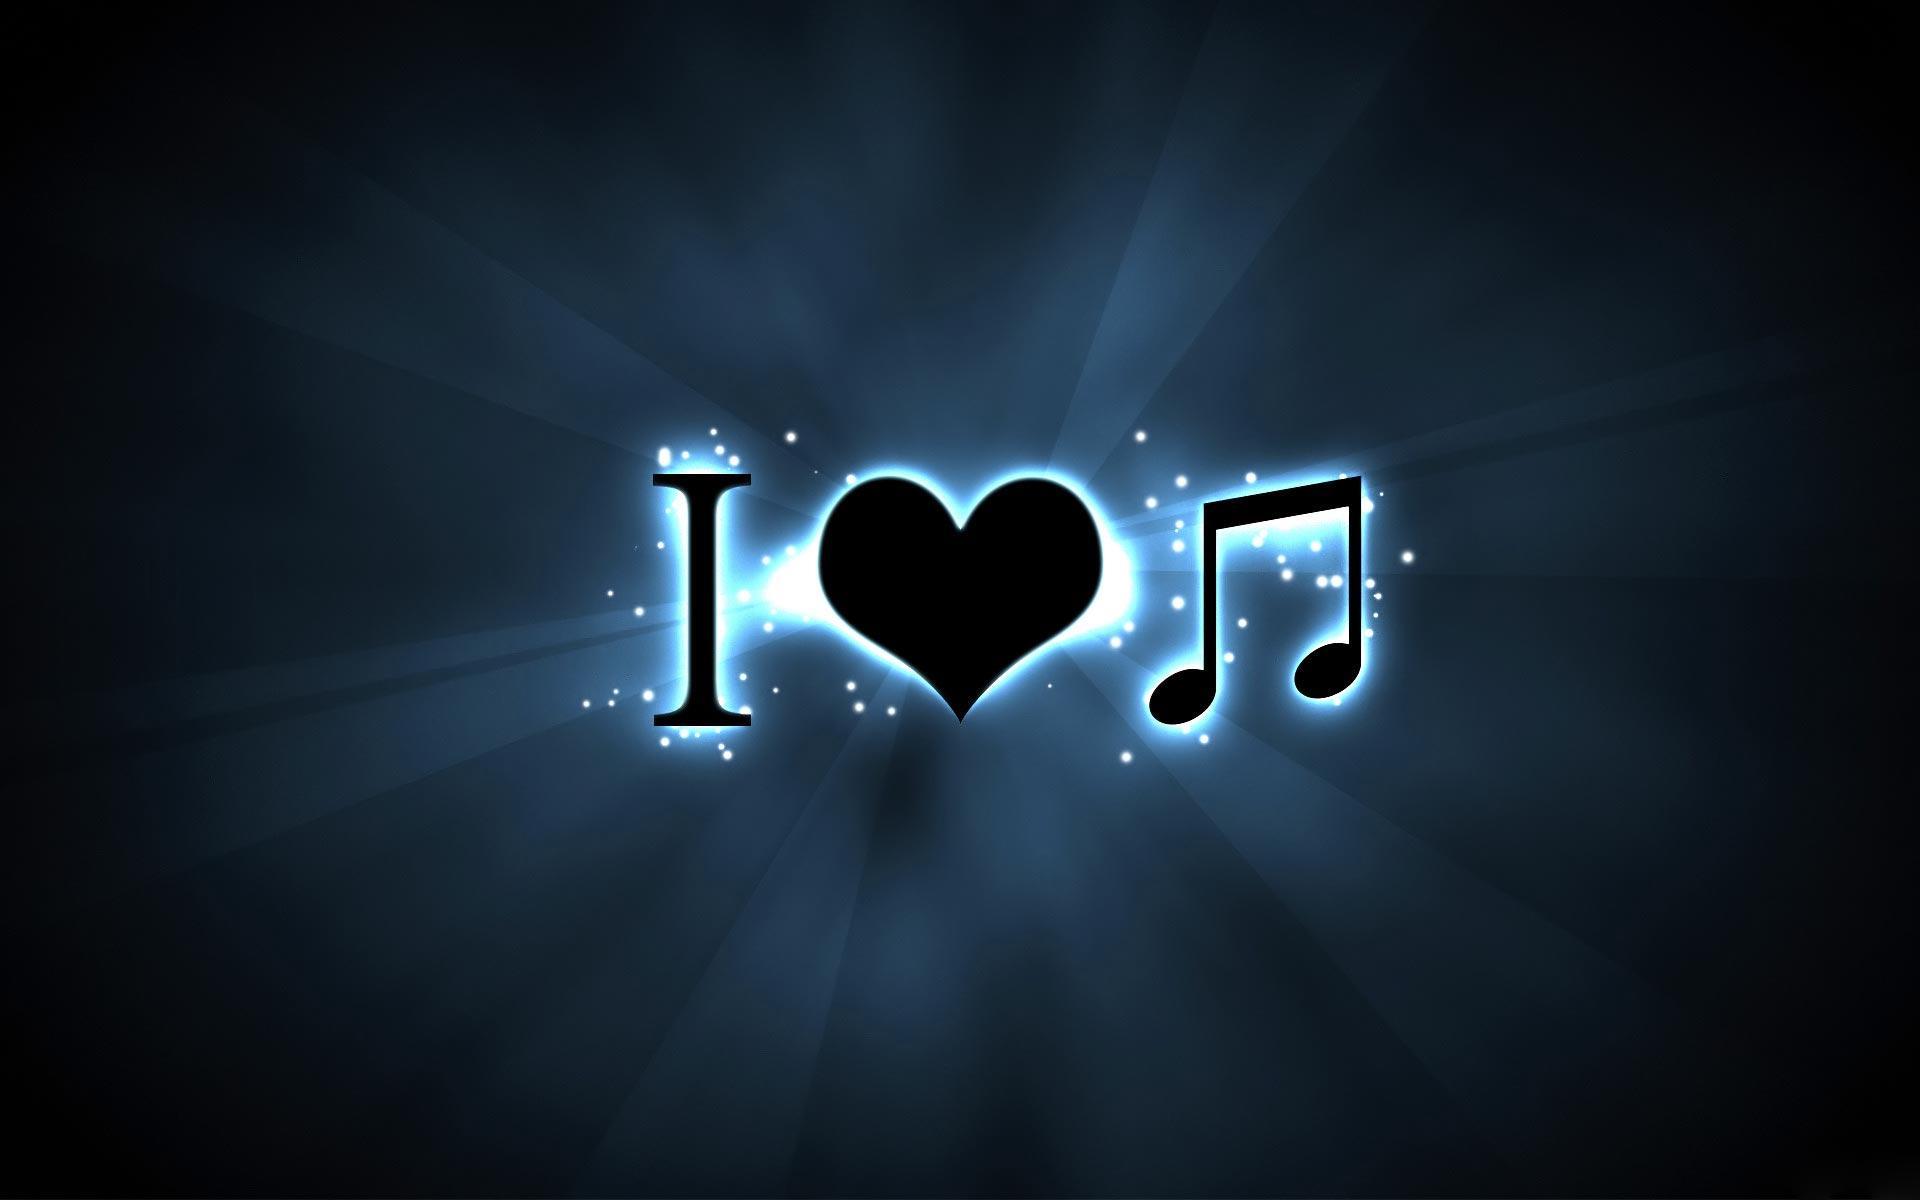 Awesome Music Wallpaper 58227 Wallpaper. wallpicsize